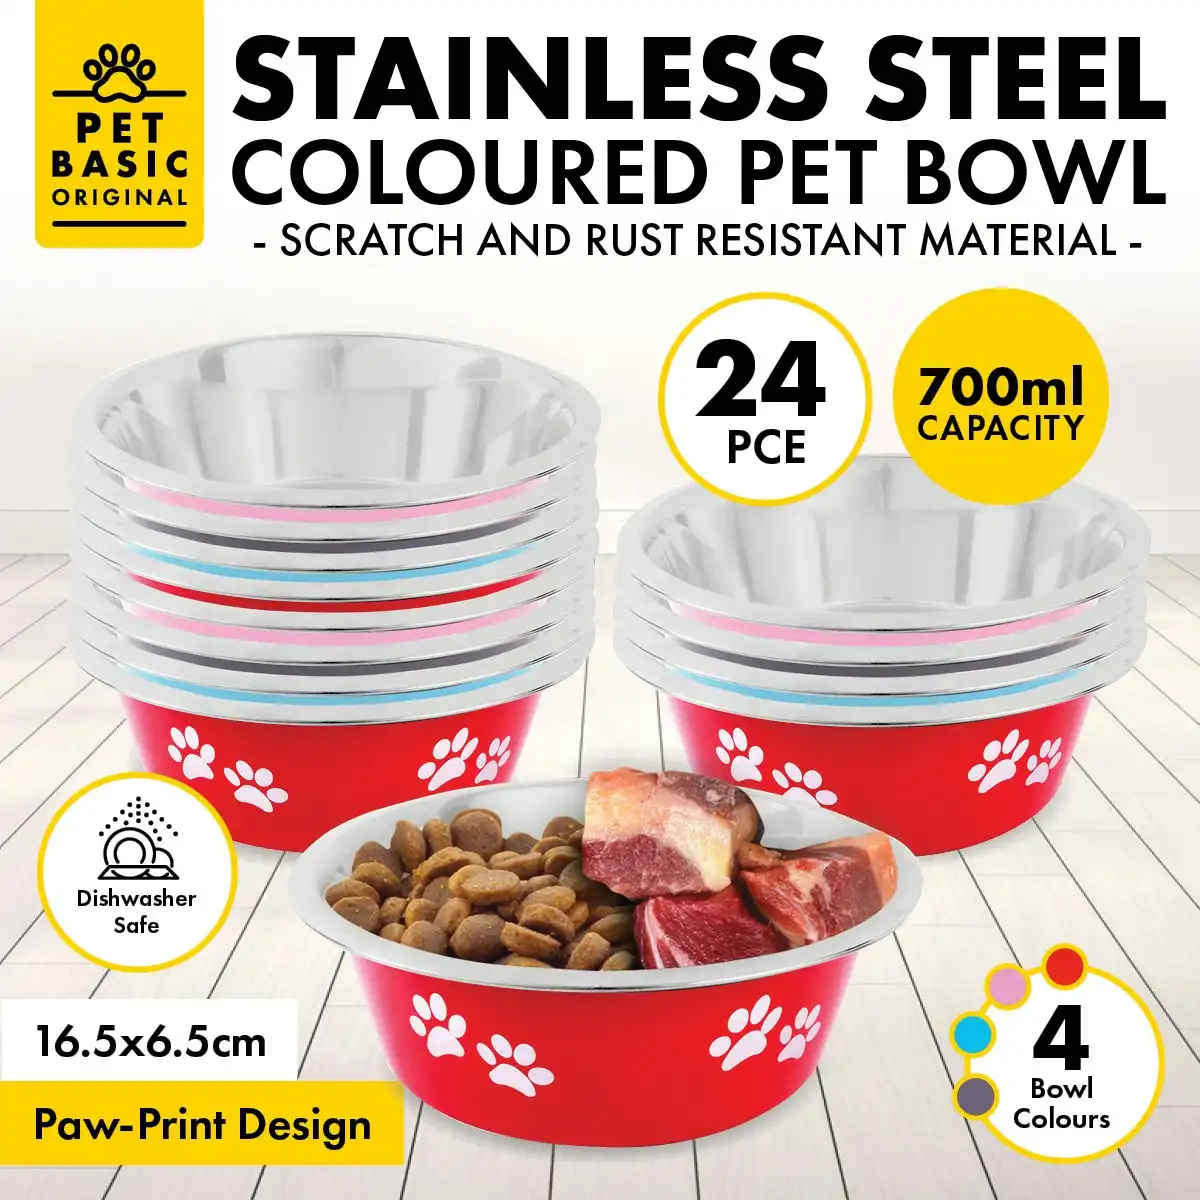 Pet Basic 24PCE Pet Bowl 16.5cm Stainless Steel Coloured With Paw Print 700ml